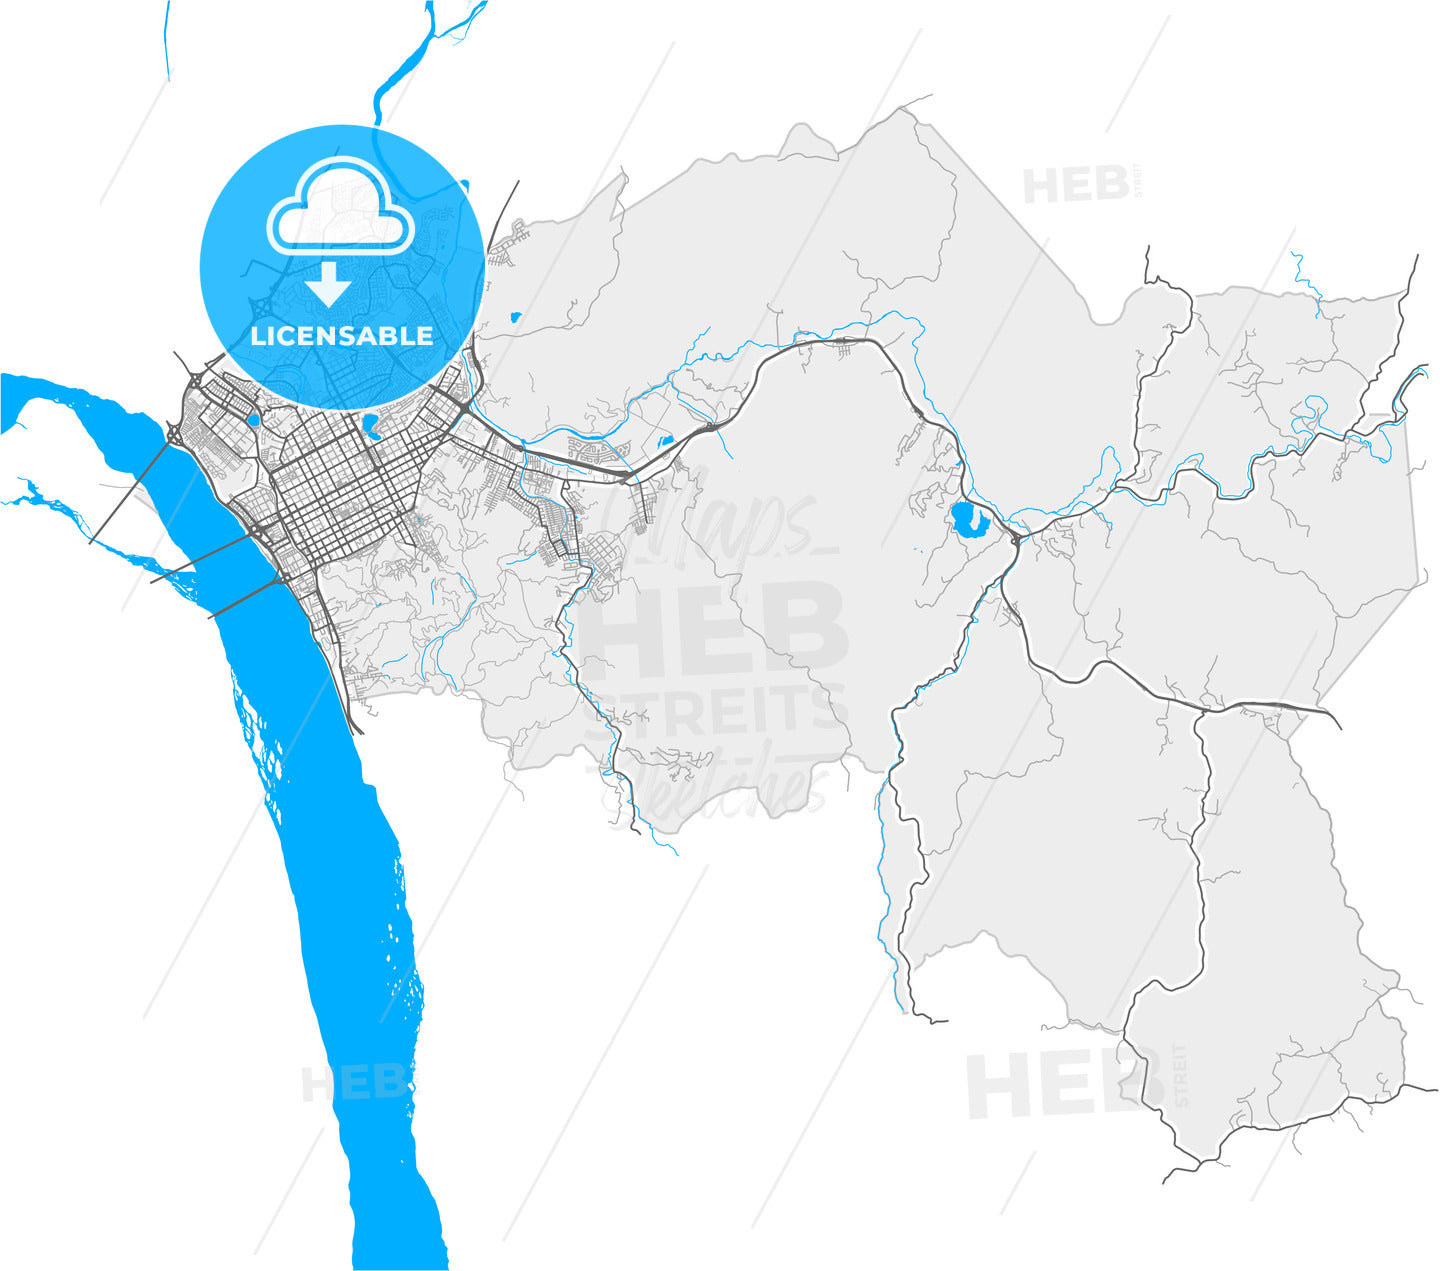 Concepcion, Chile, high quality vector map